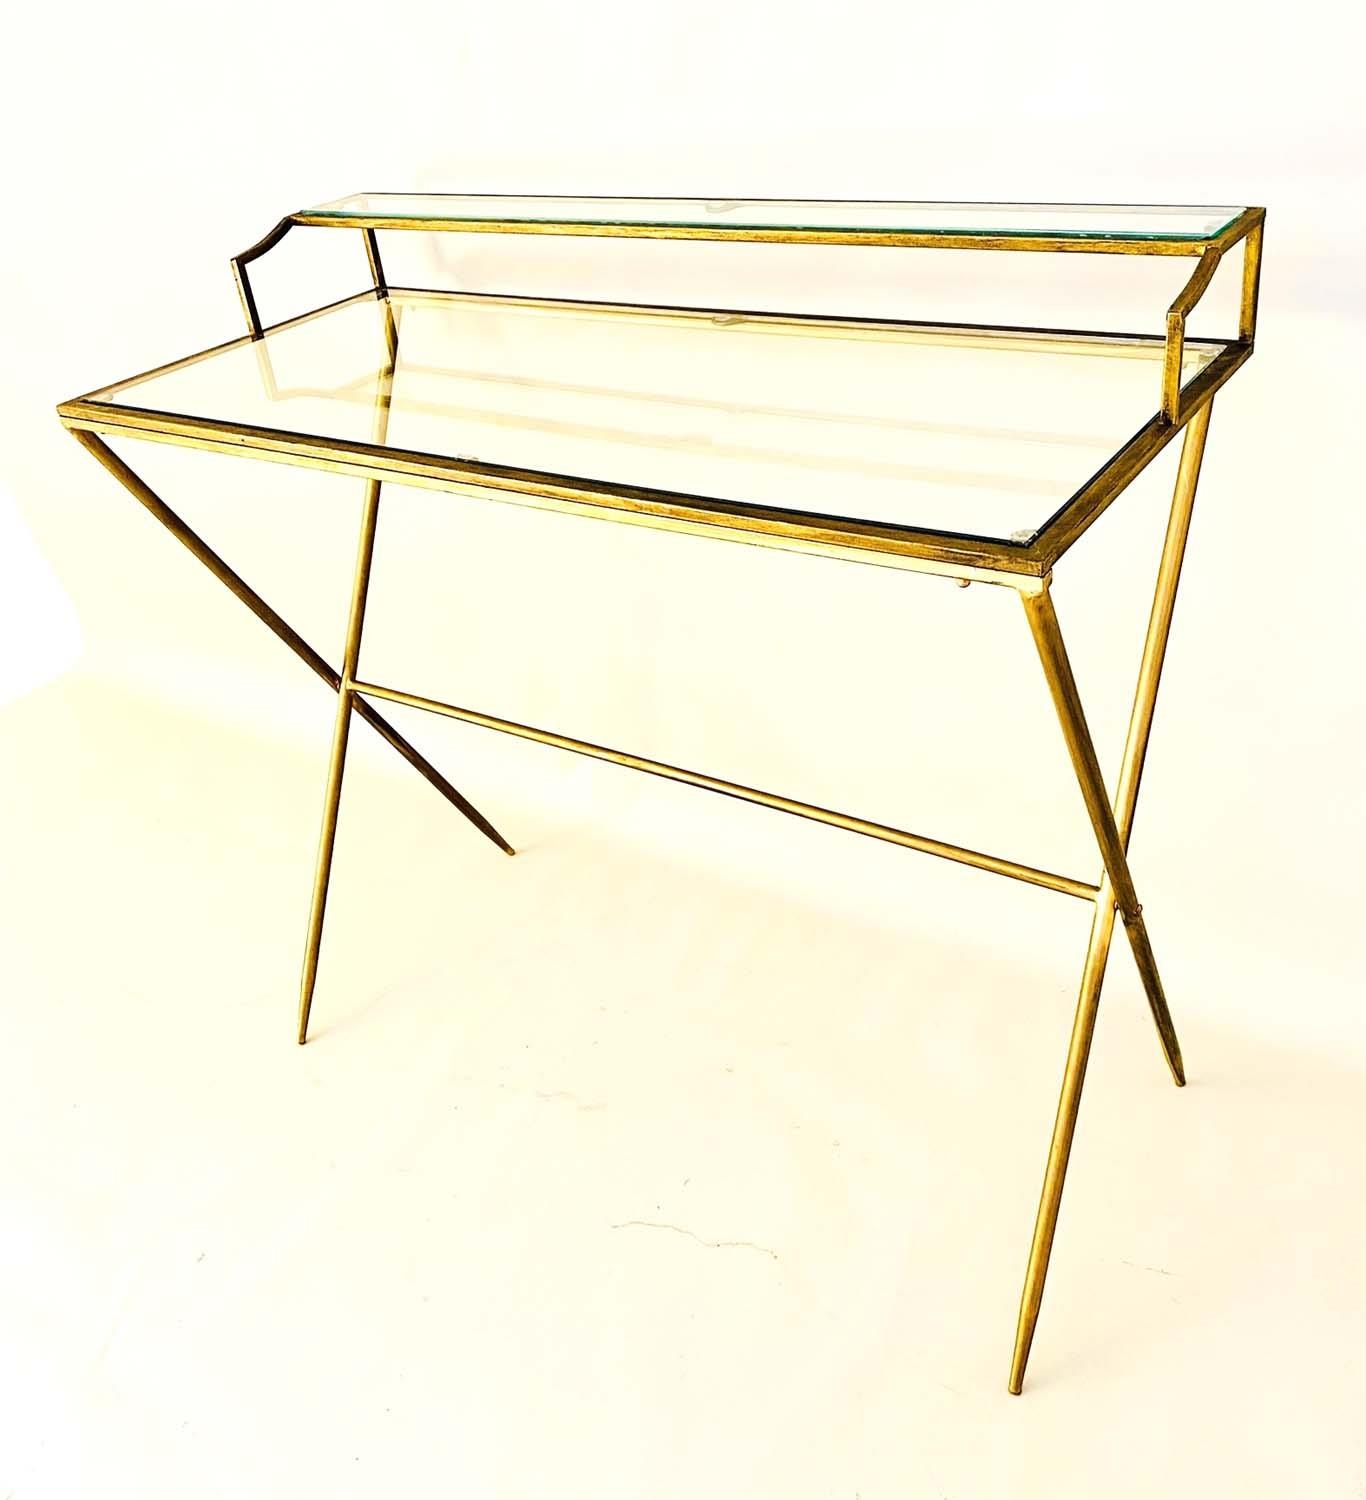 WRITING DESK, 1960s French style, gilt metal and glass, 87cm x 95cm x 42cm.